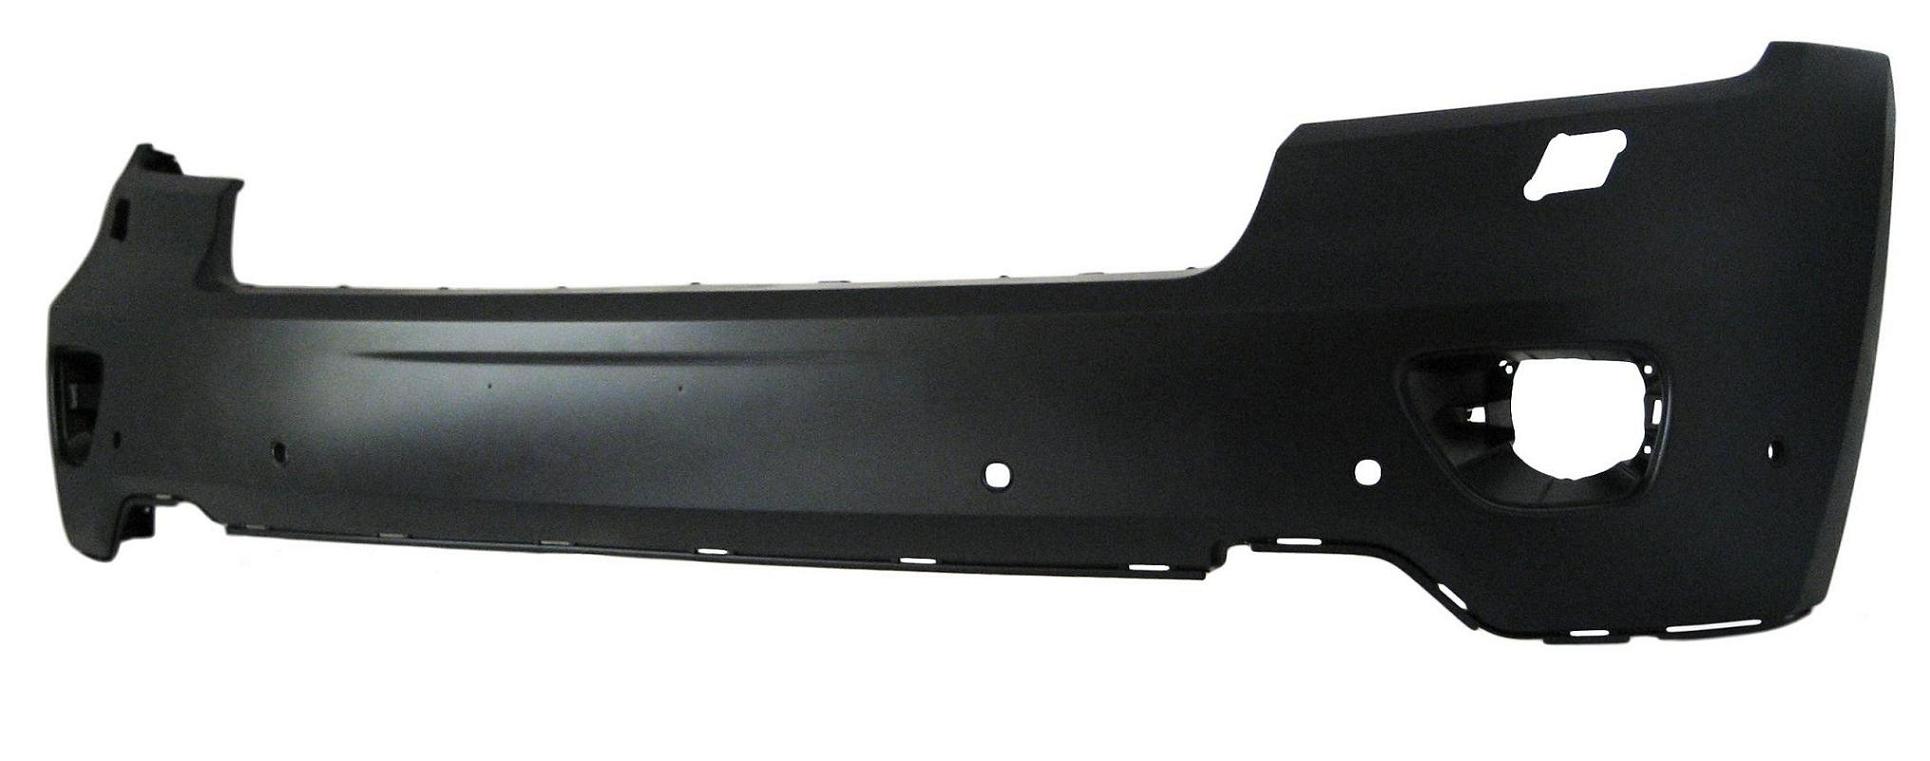 Aftermarket BUMPER COVERS for JEEP - GRAND CHEROKEE, GRAND CHEROKEE,11-13,Front bumper cover